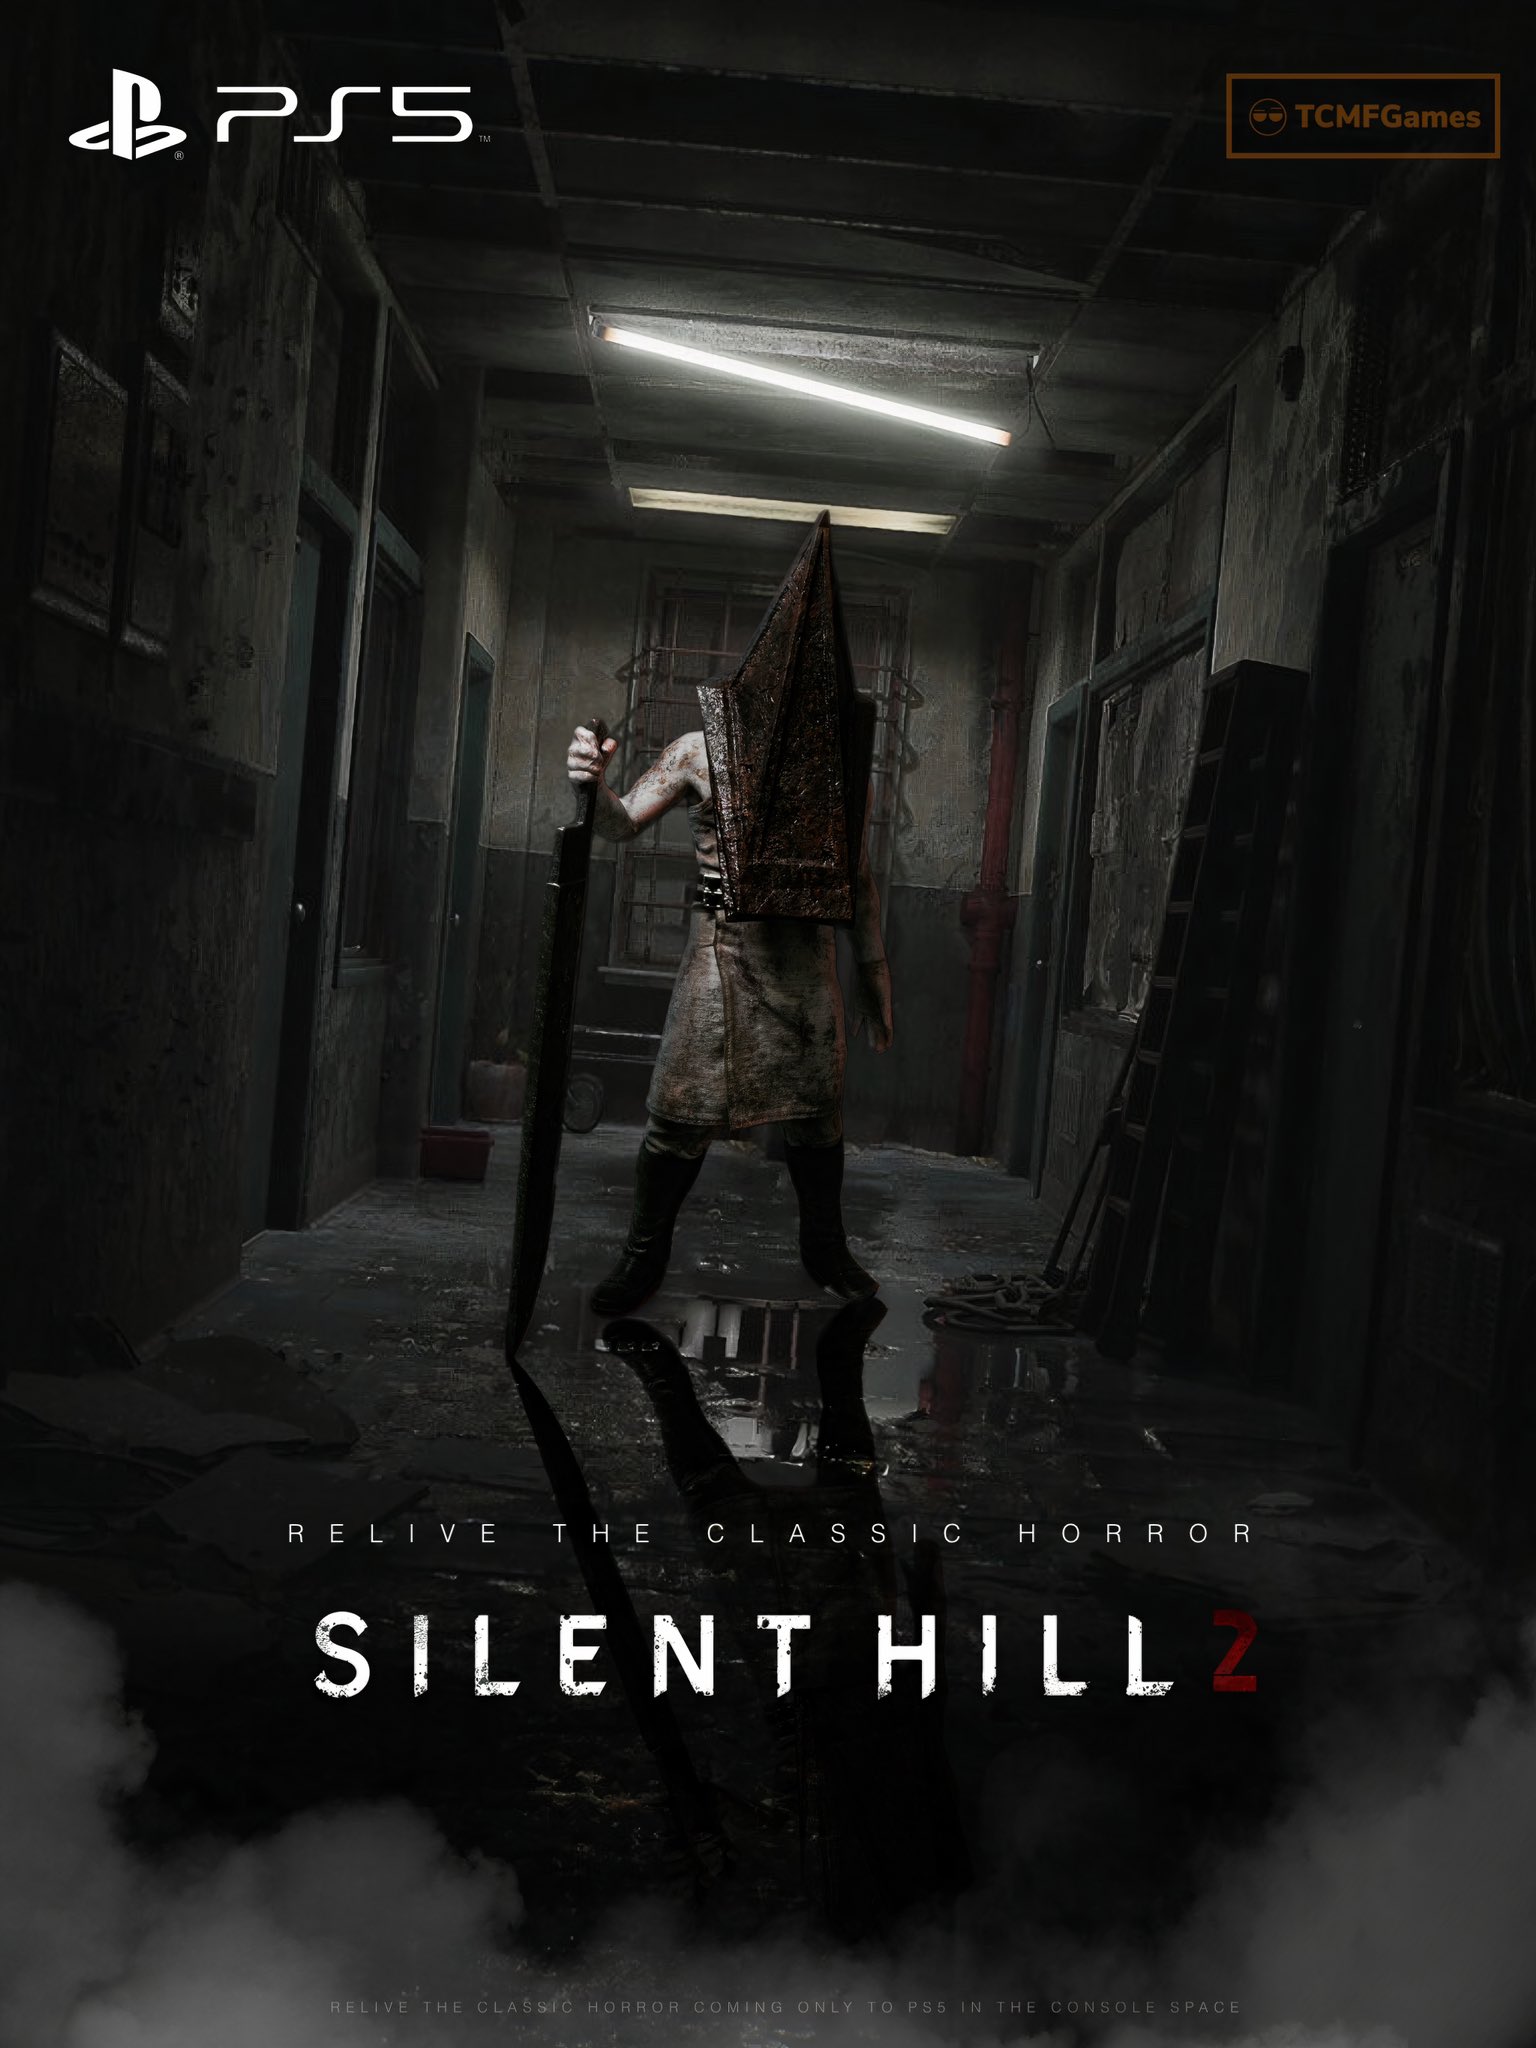 TCMFGames on X: PS5 exclusive Silent Hill 2